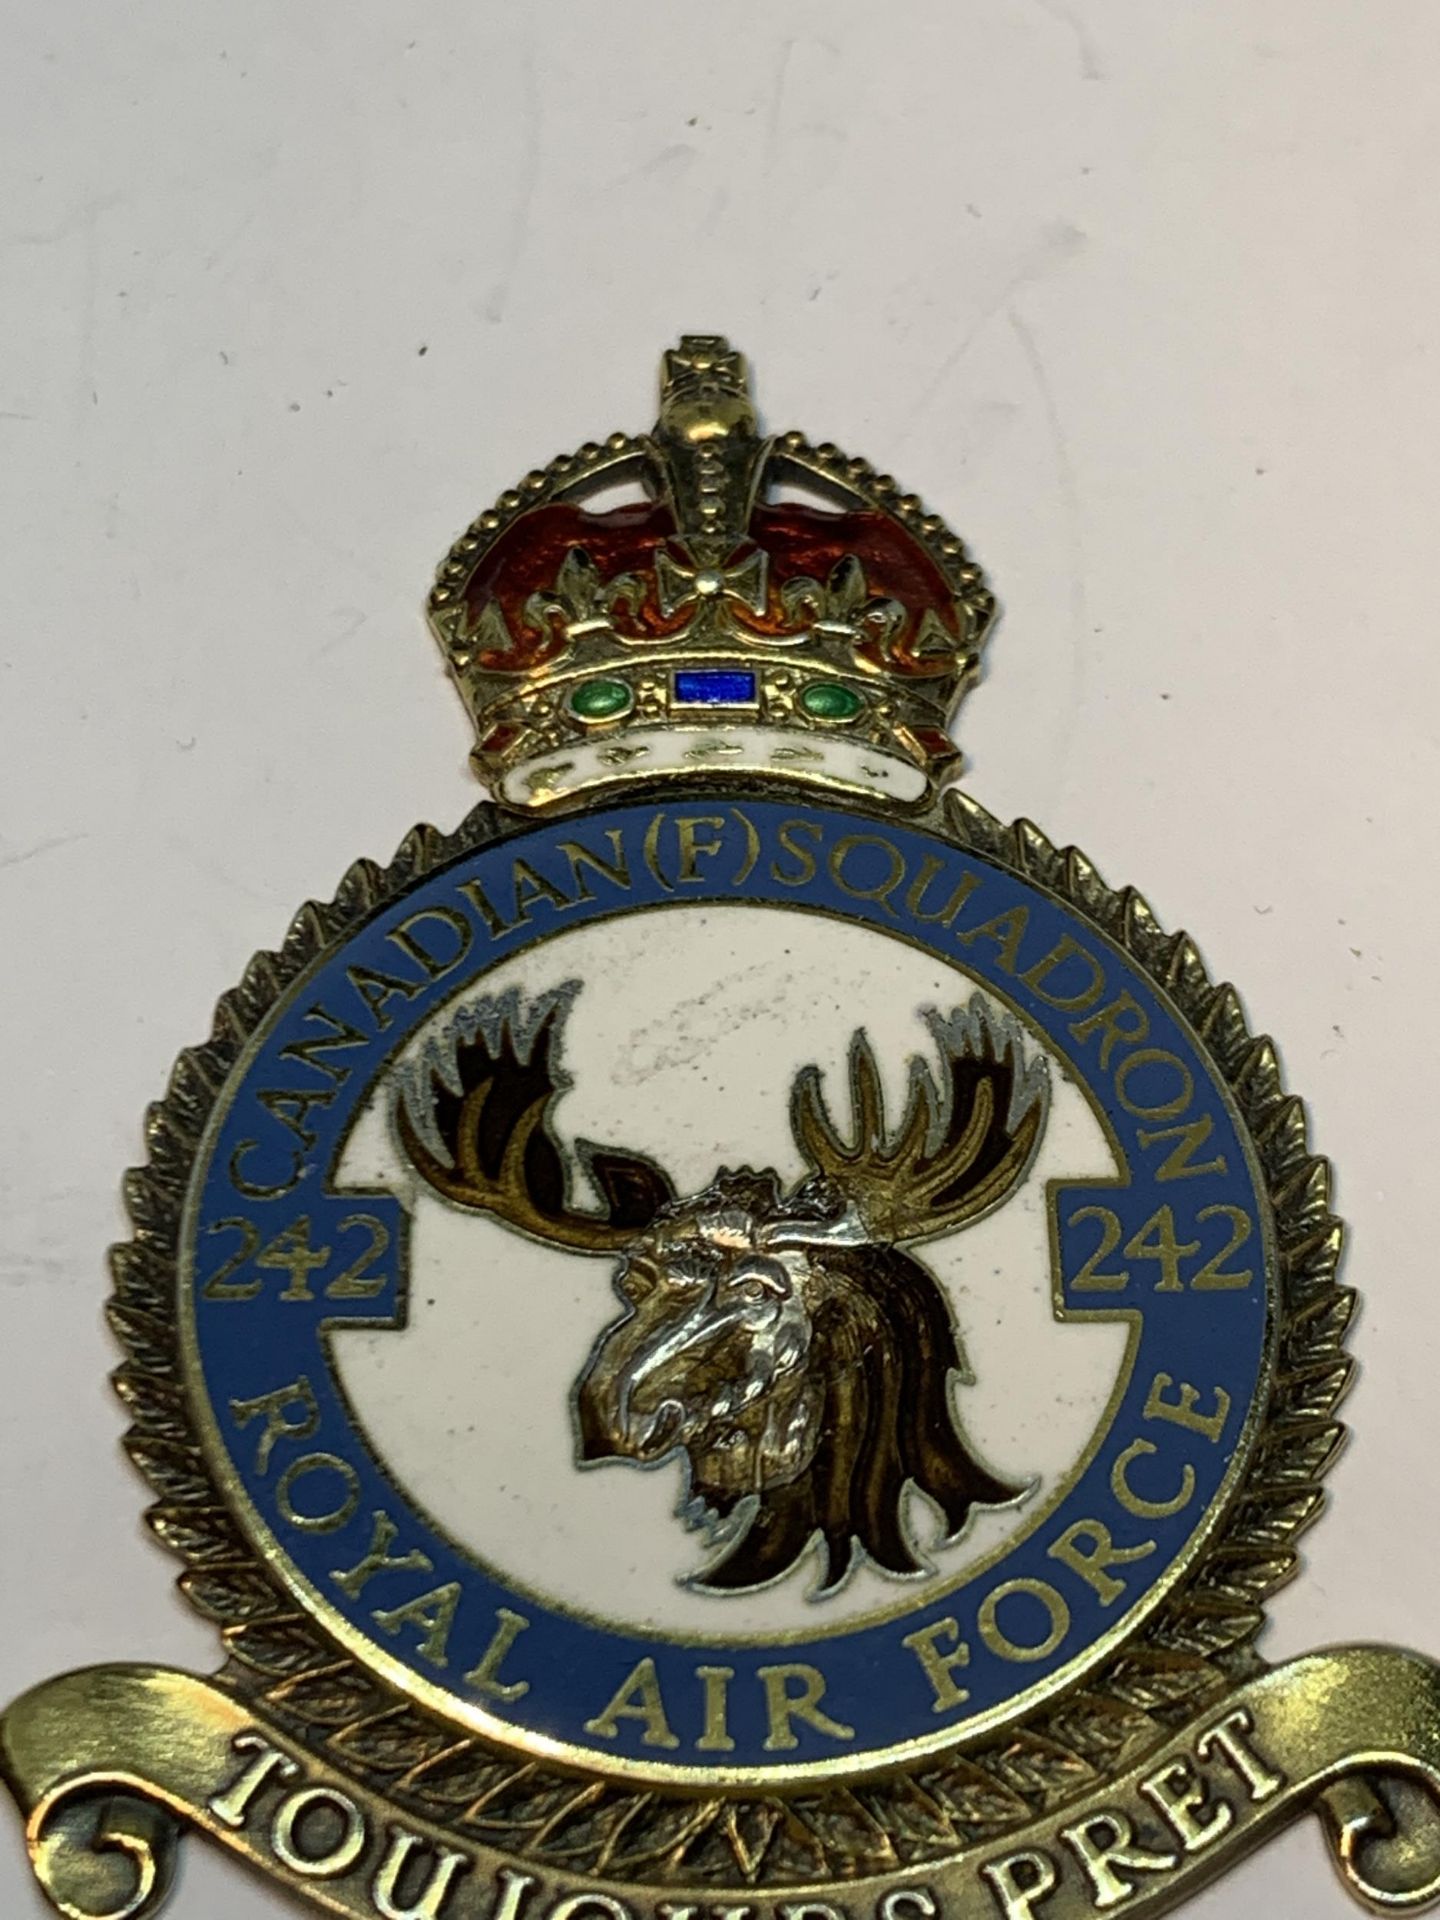 A HALLMARKED BIRMINGHAM SILVER ROYAL AIR FORCE CANADIAN SQUAD 242 TOUJOURS PRET - Image 2 of 4